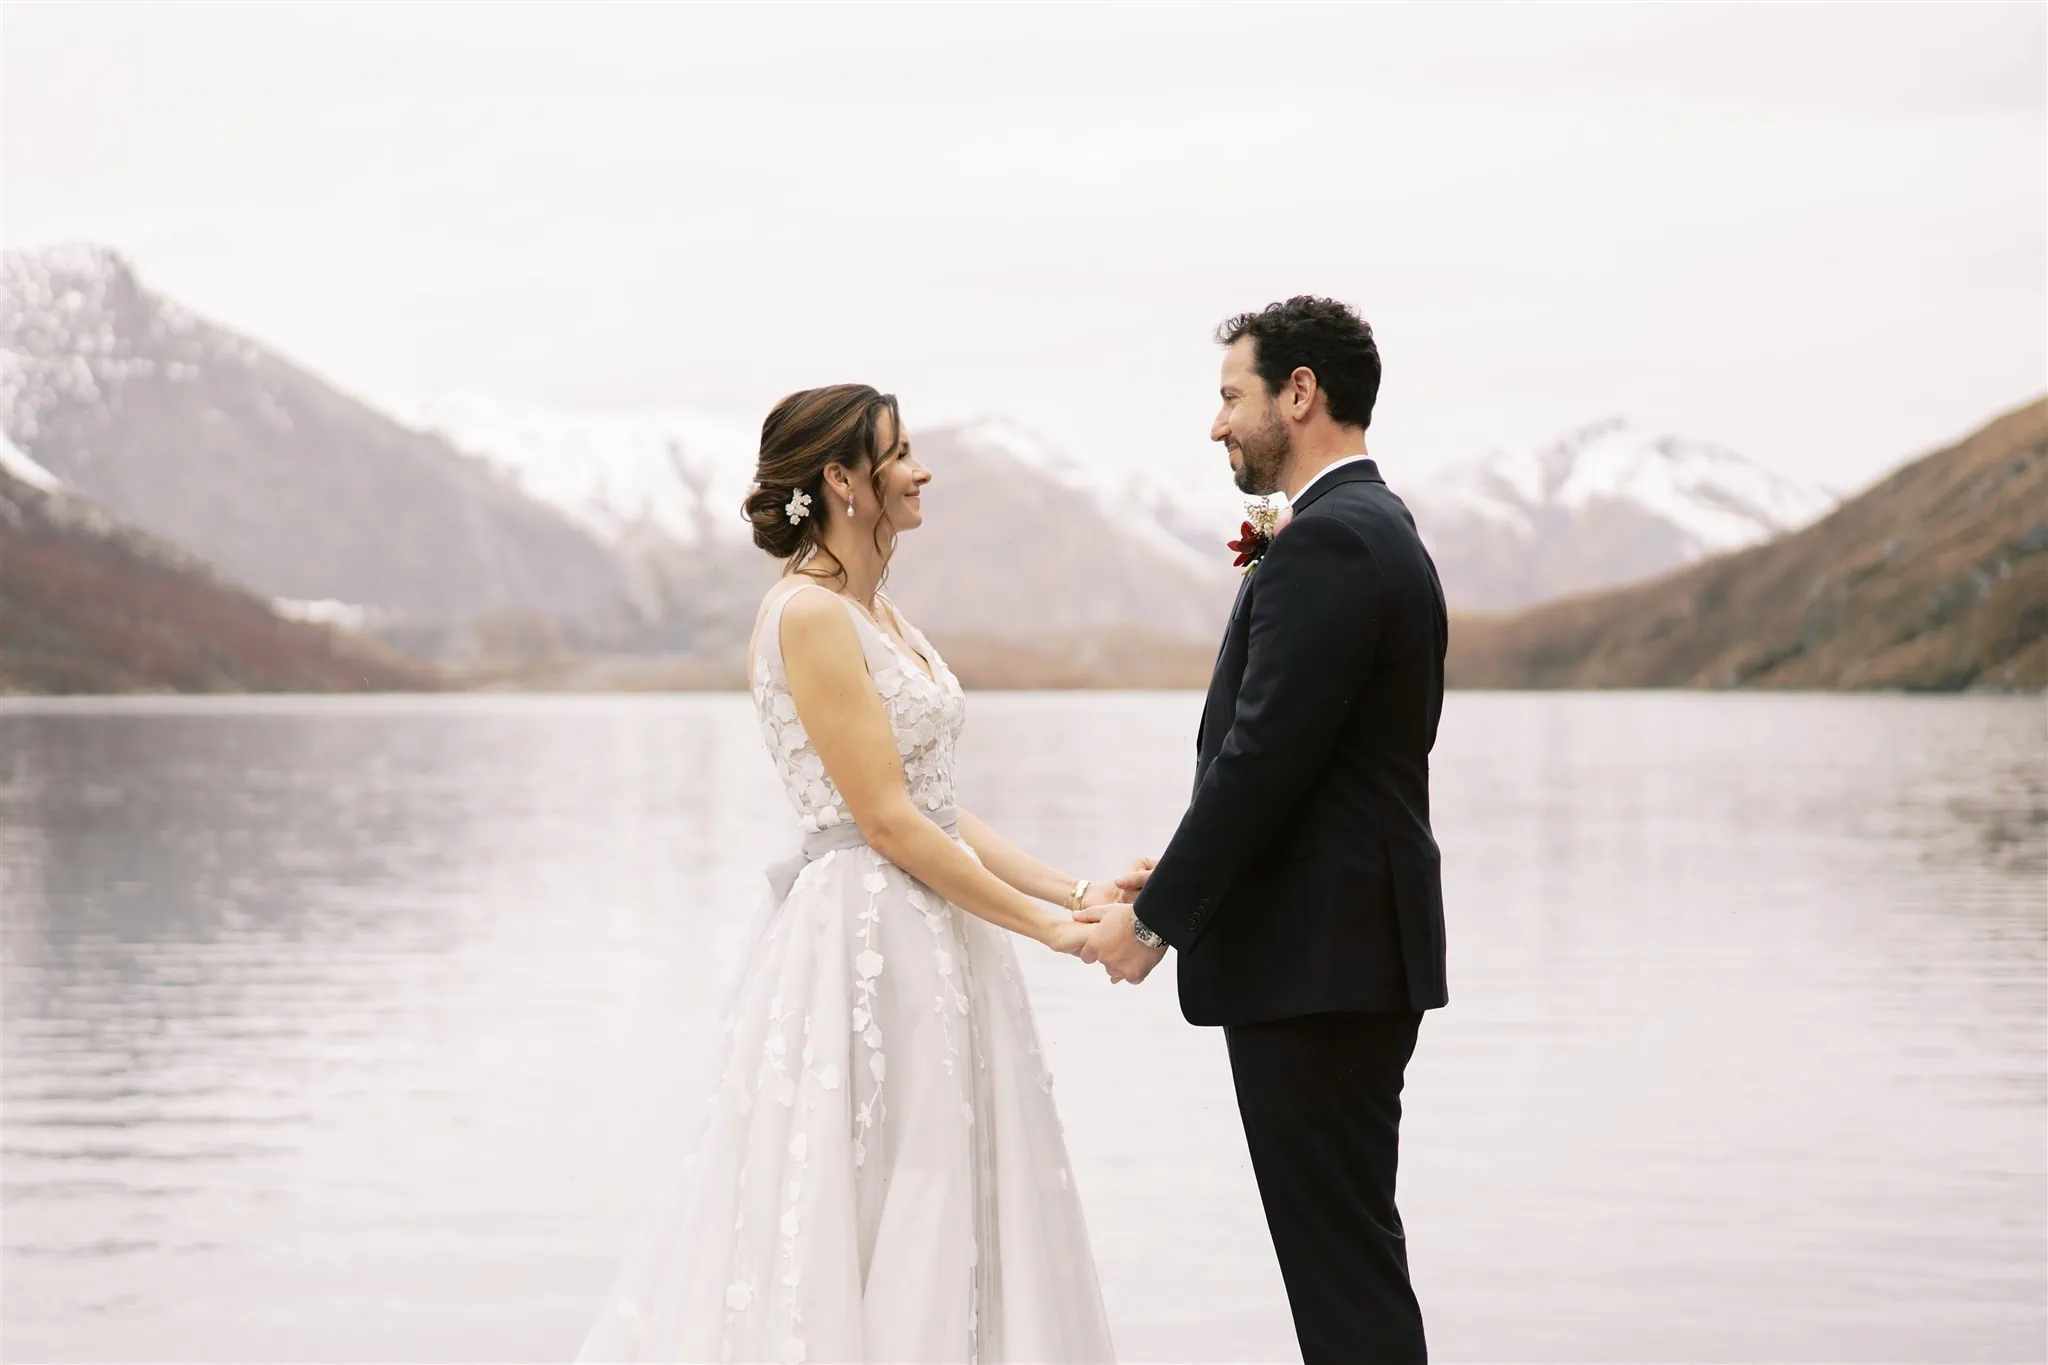 Queenstown New Zealand Elopement Wedding Photographer - Alex & Shahar, a bride and groom, captured their special Queenstown elopement moment in front of a serene lake surrounded by majestic mountains.